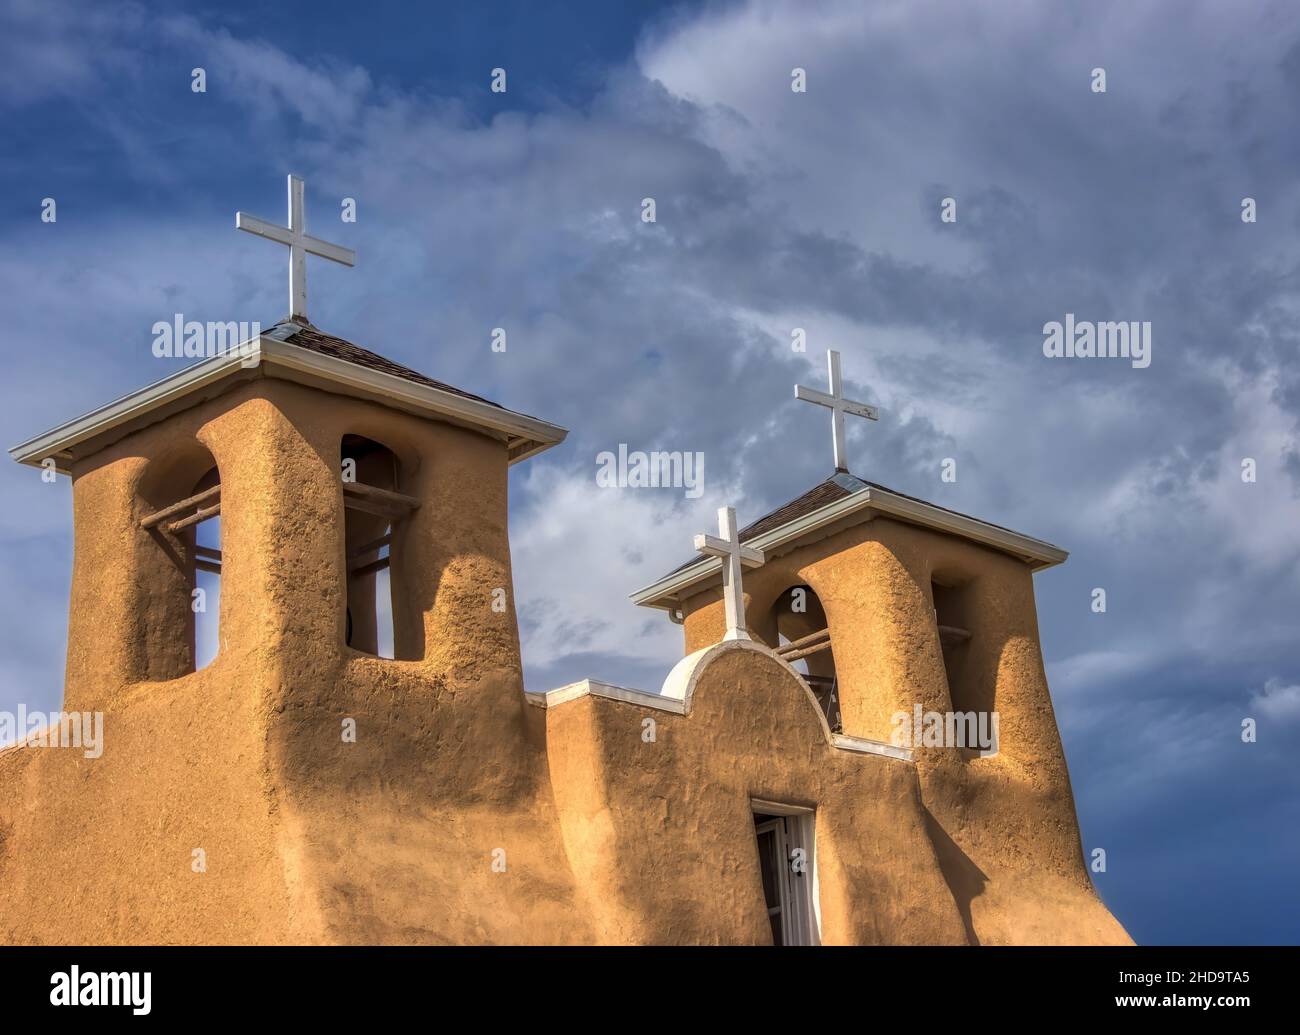 San Francisco de Asis Mission with white wooden crosses atop twin bell towers Stock Photo